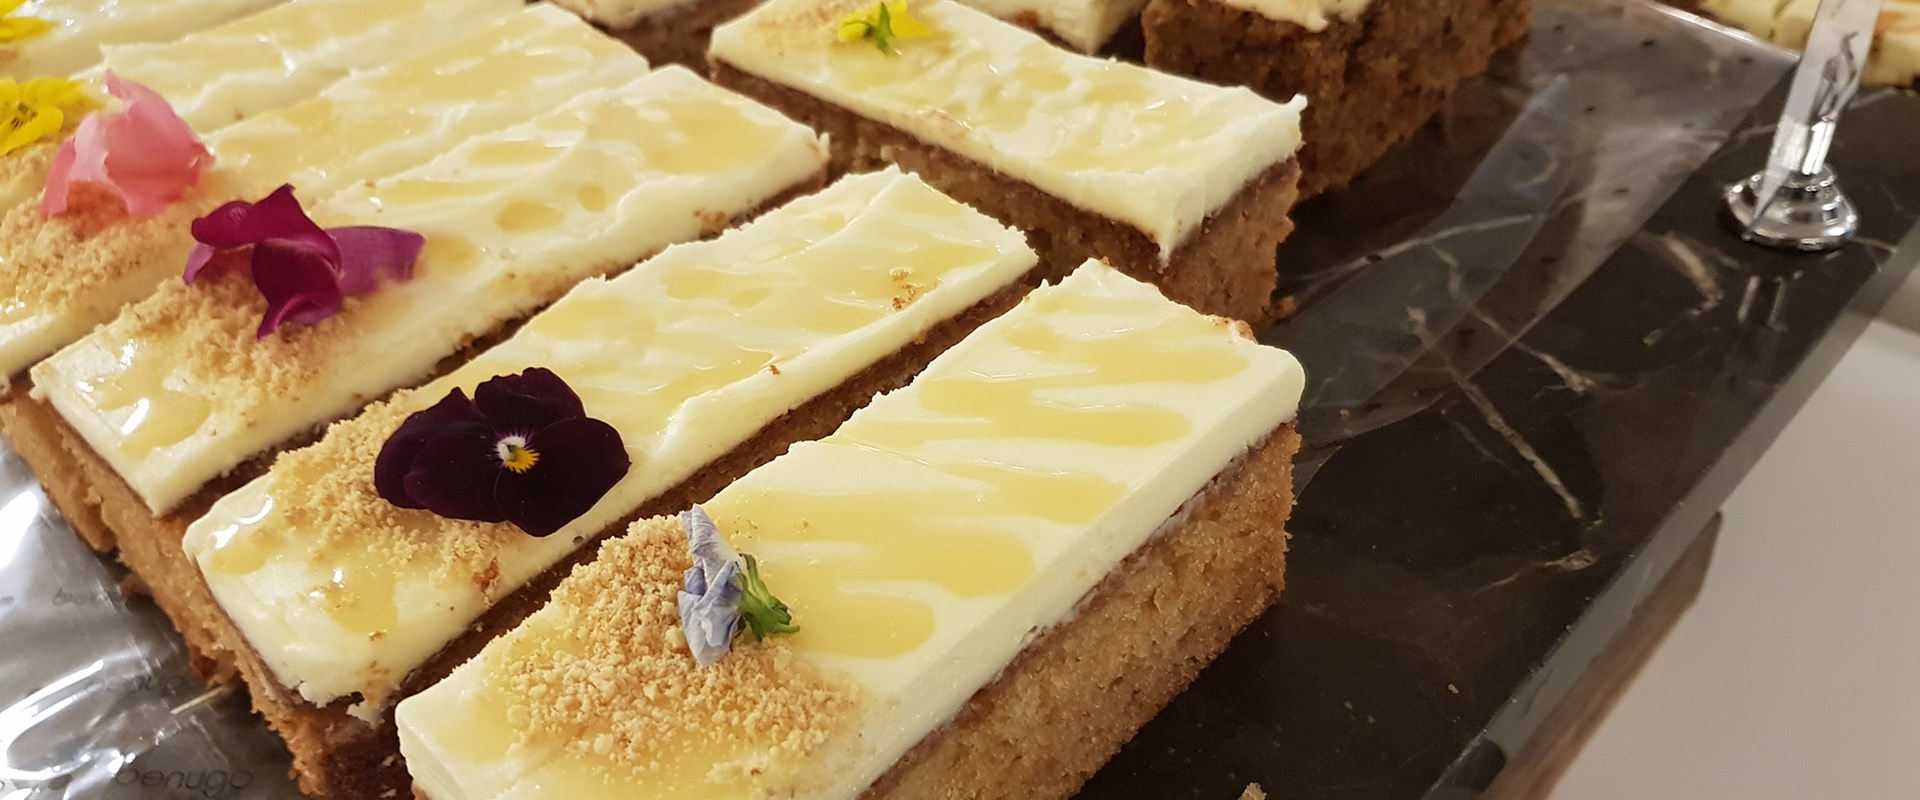 Rectangles of yellow cake with white icing and floral decorations